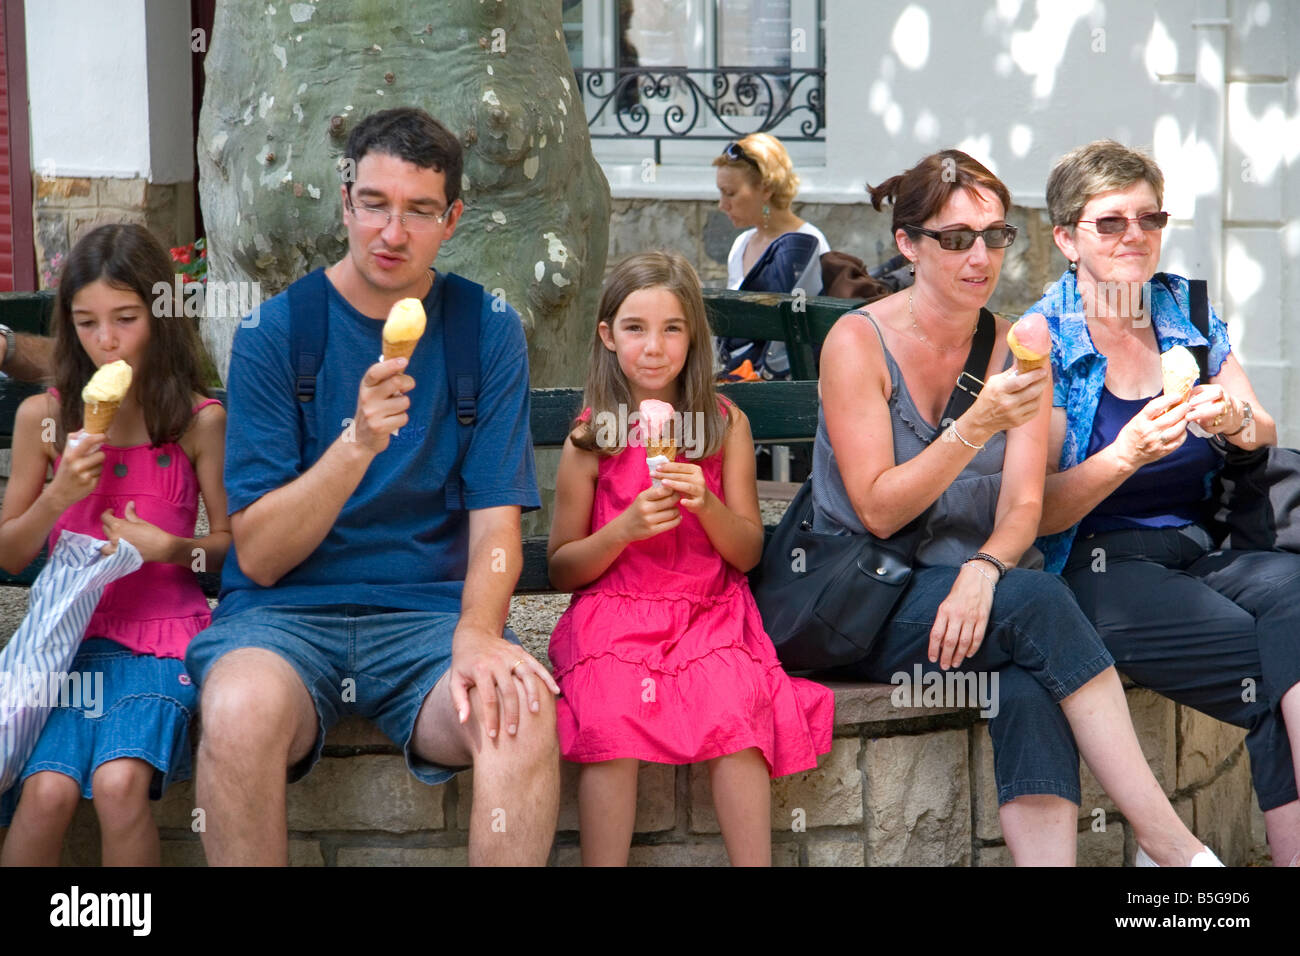 Family eating ice cream in the town of Saint Jean de Luz Pyrenees Atlantiques French Basque Country Southwest France Stock Photo